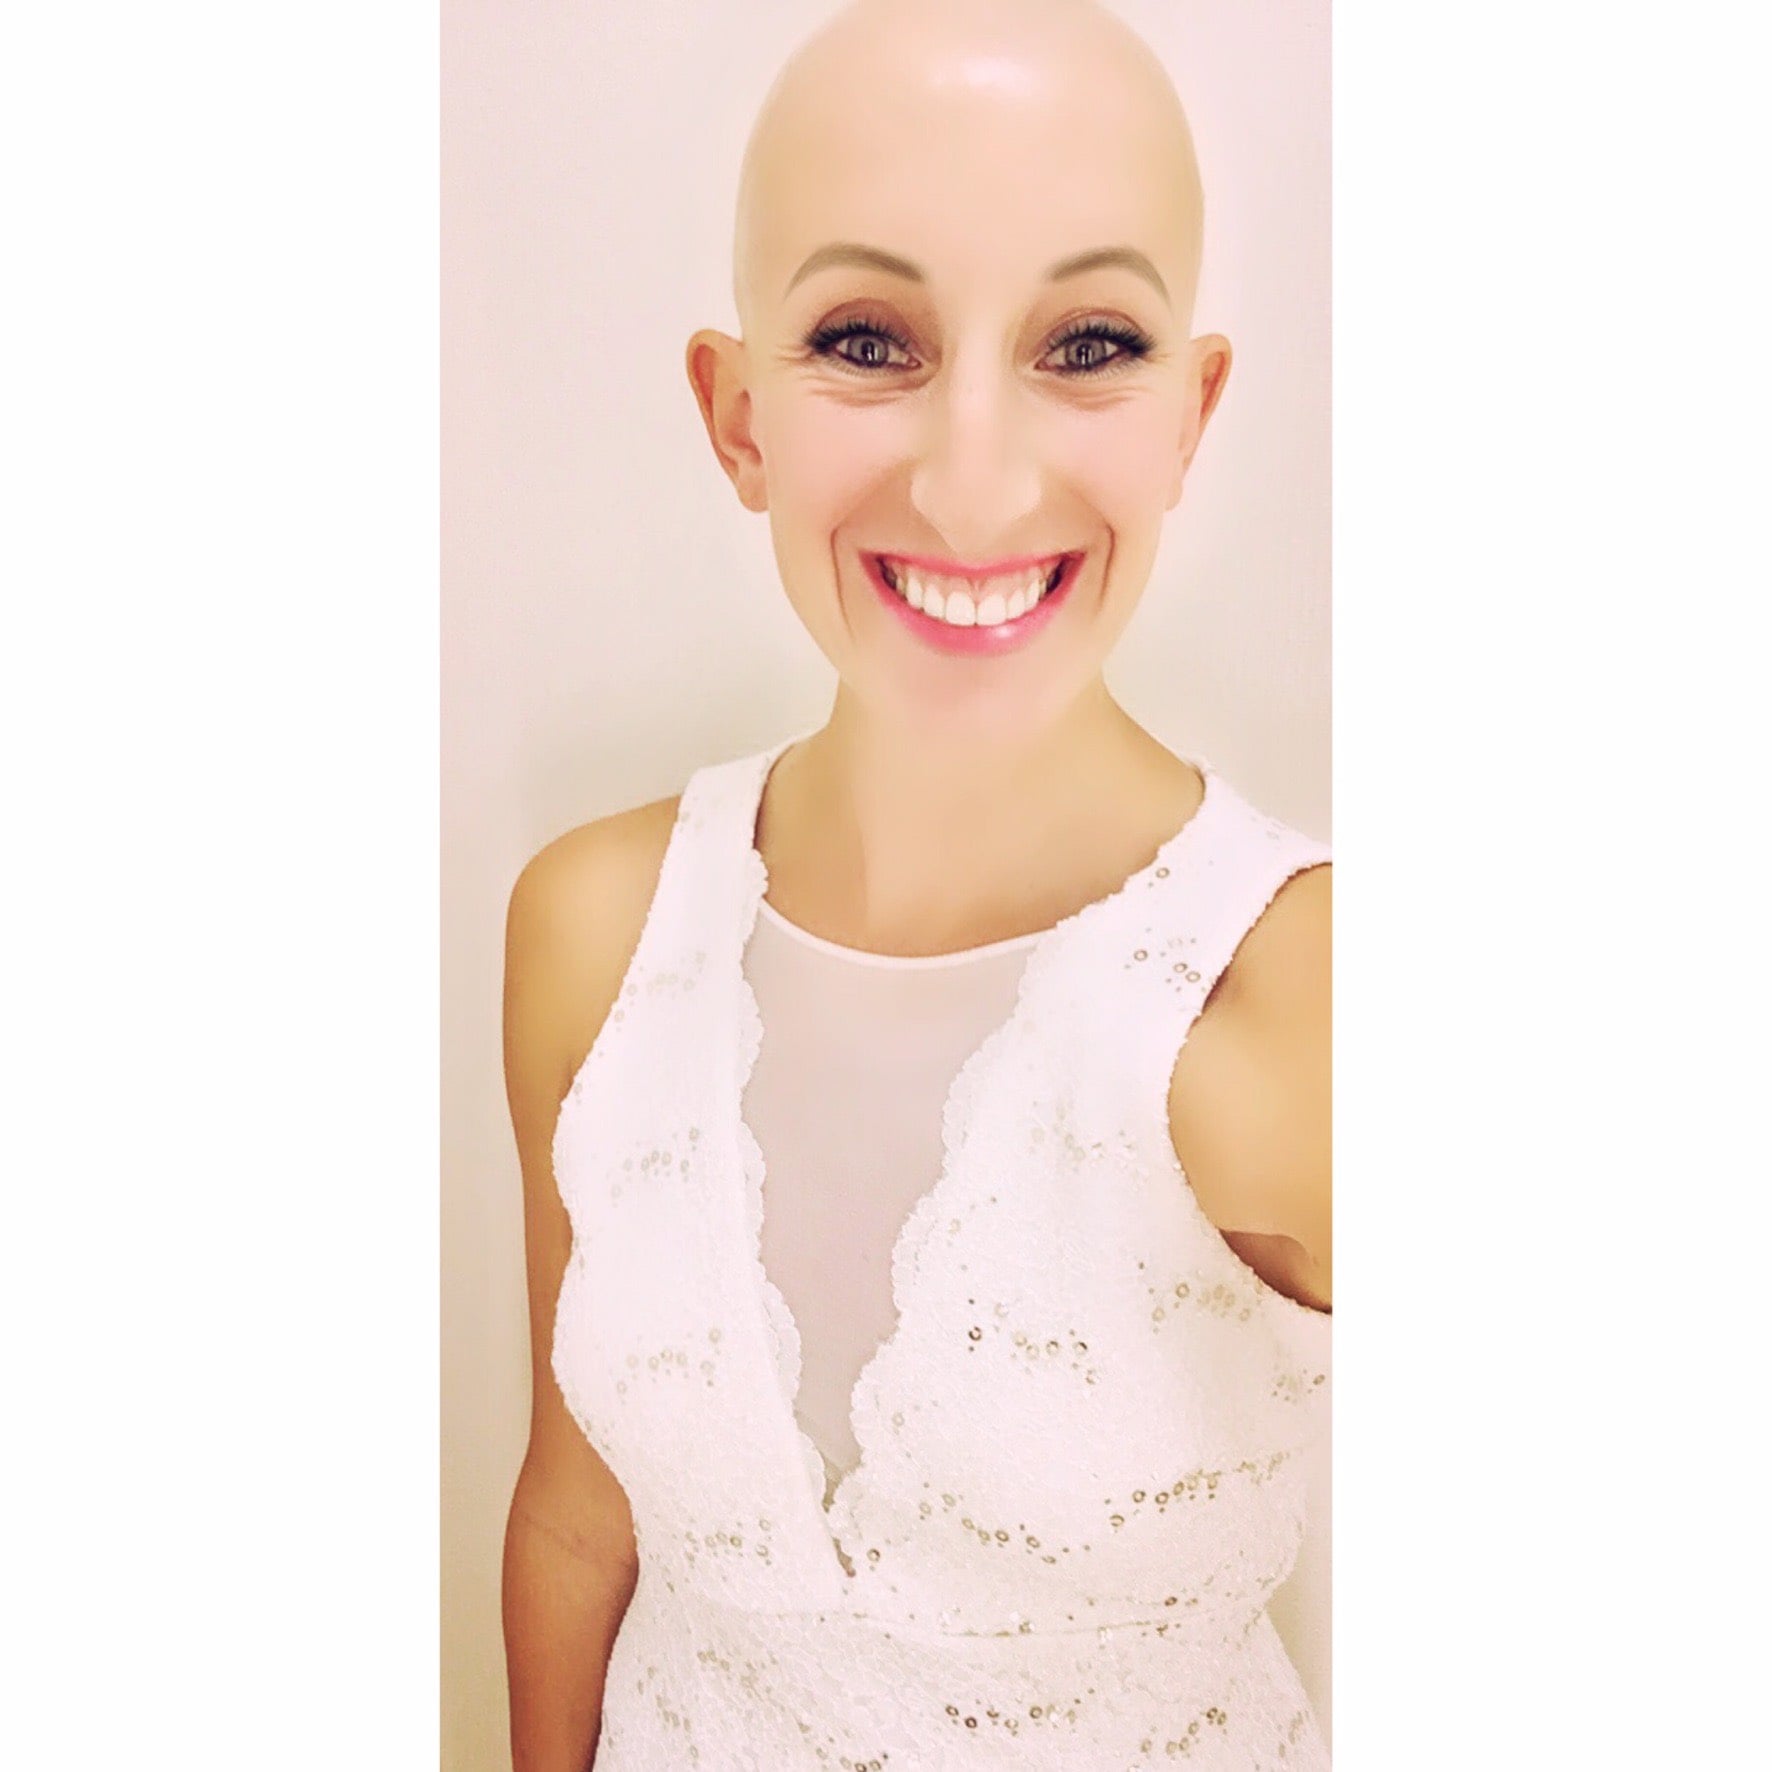 Personal Essay on Running With Alopecia | POPSUGAR Fitness